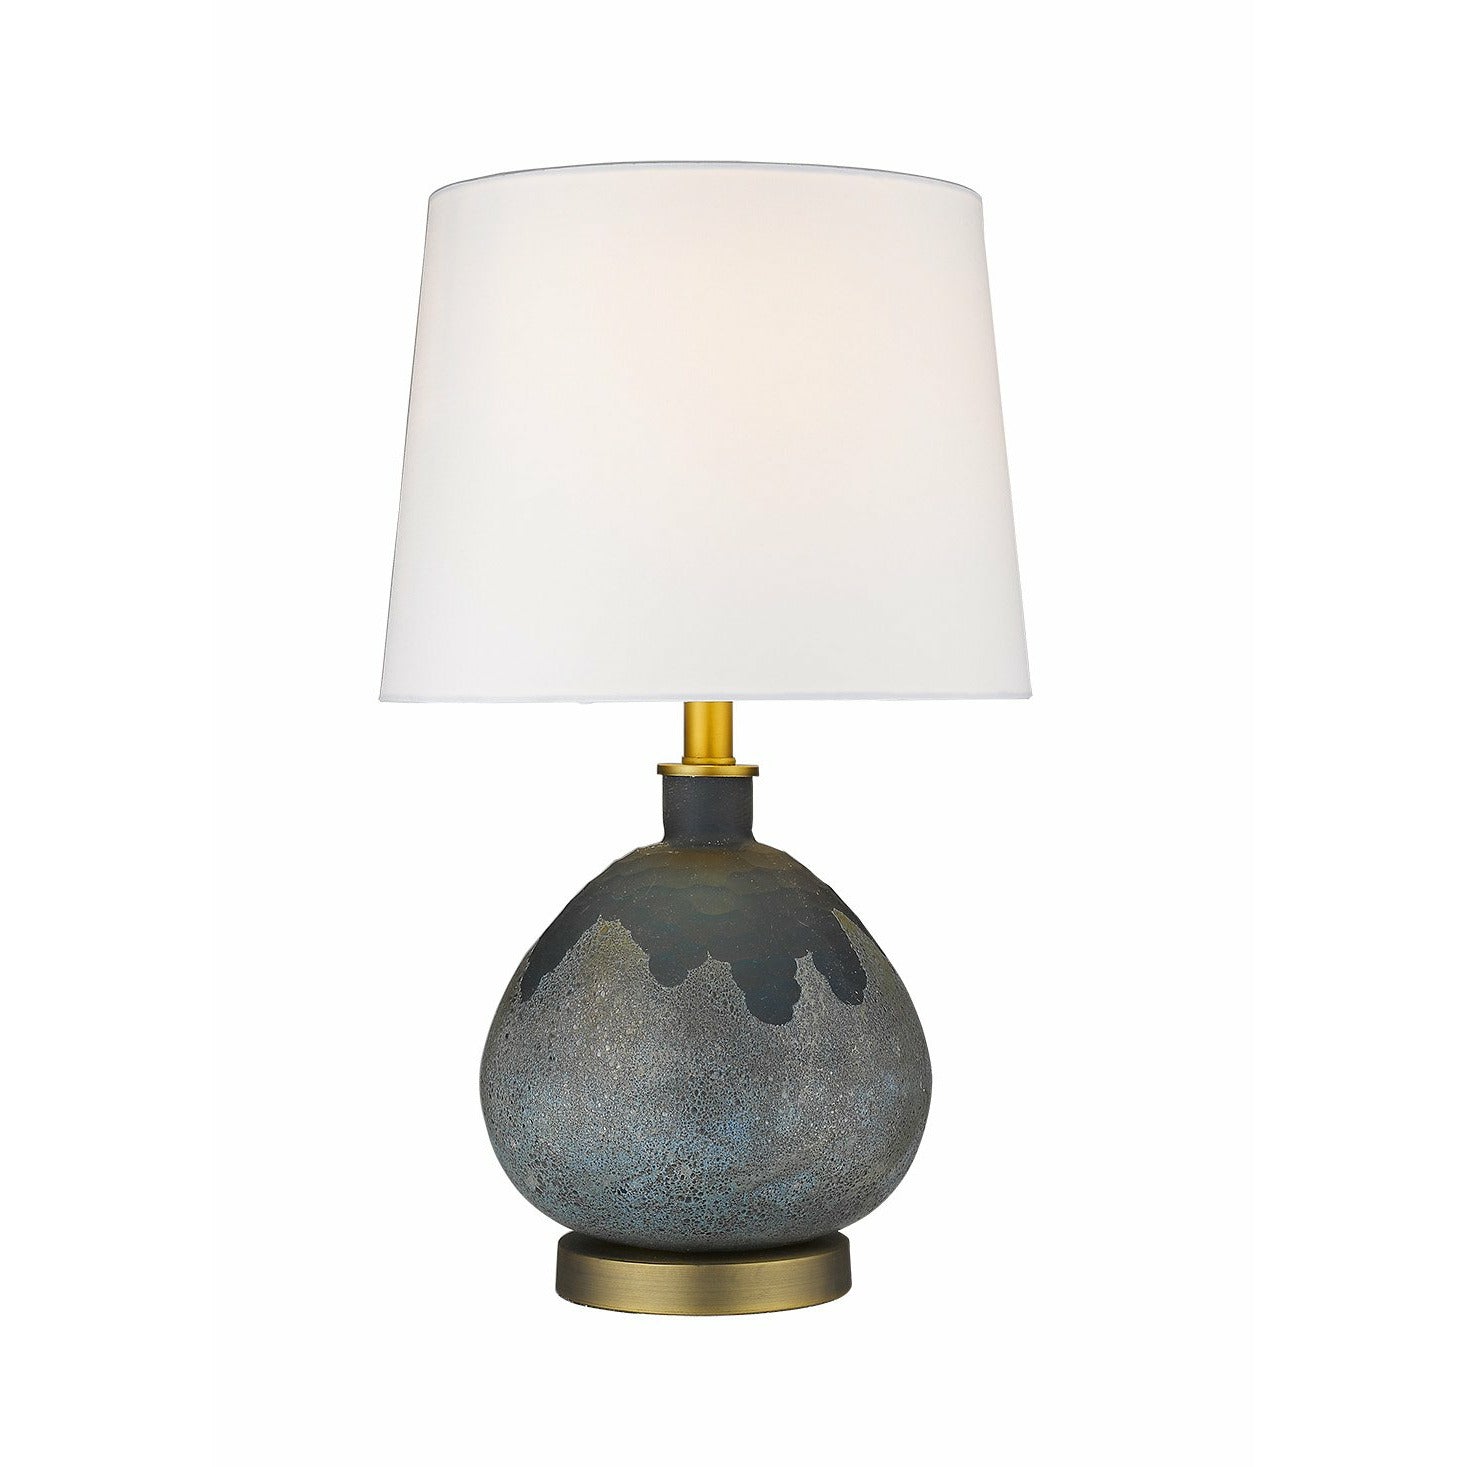 Trend Home Table Lamp Brass